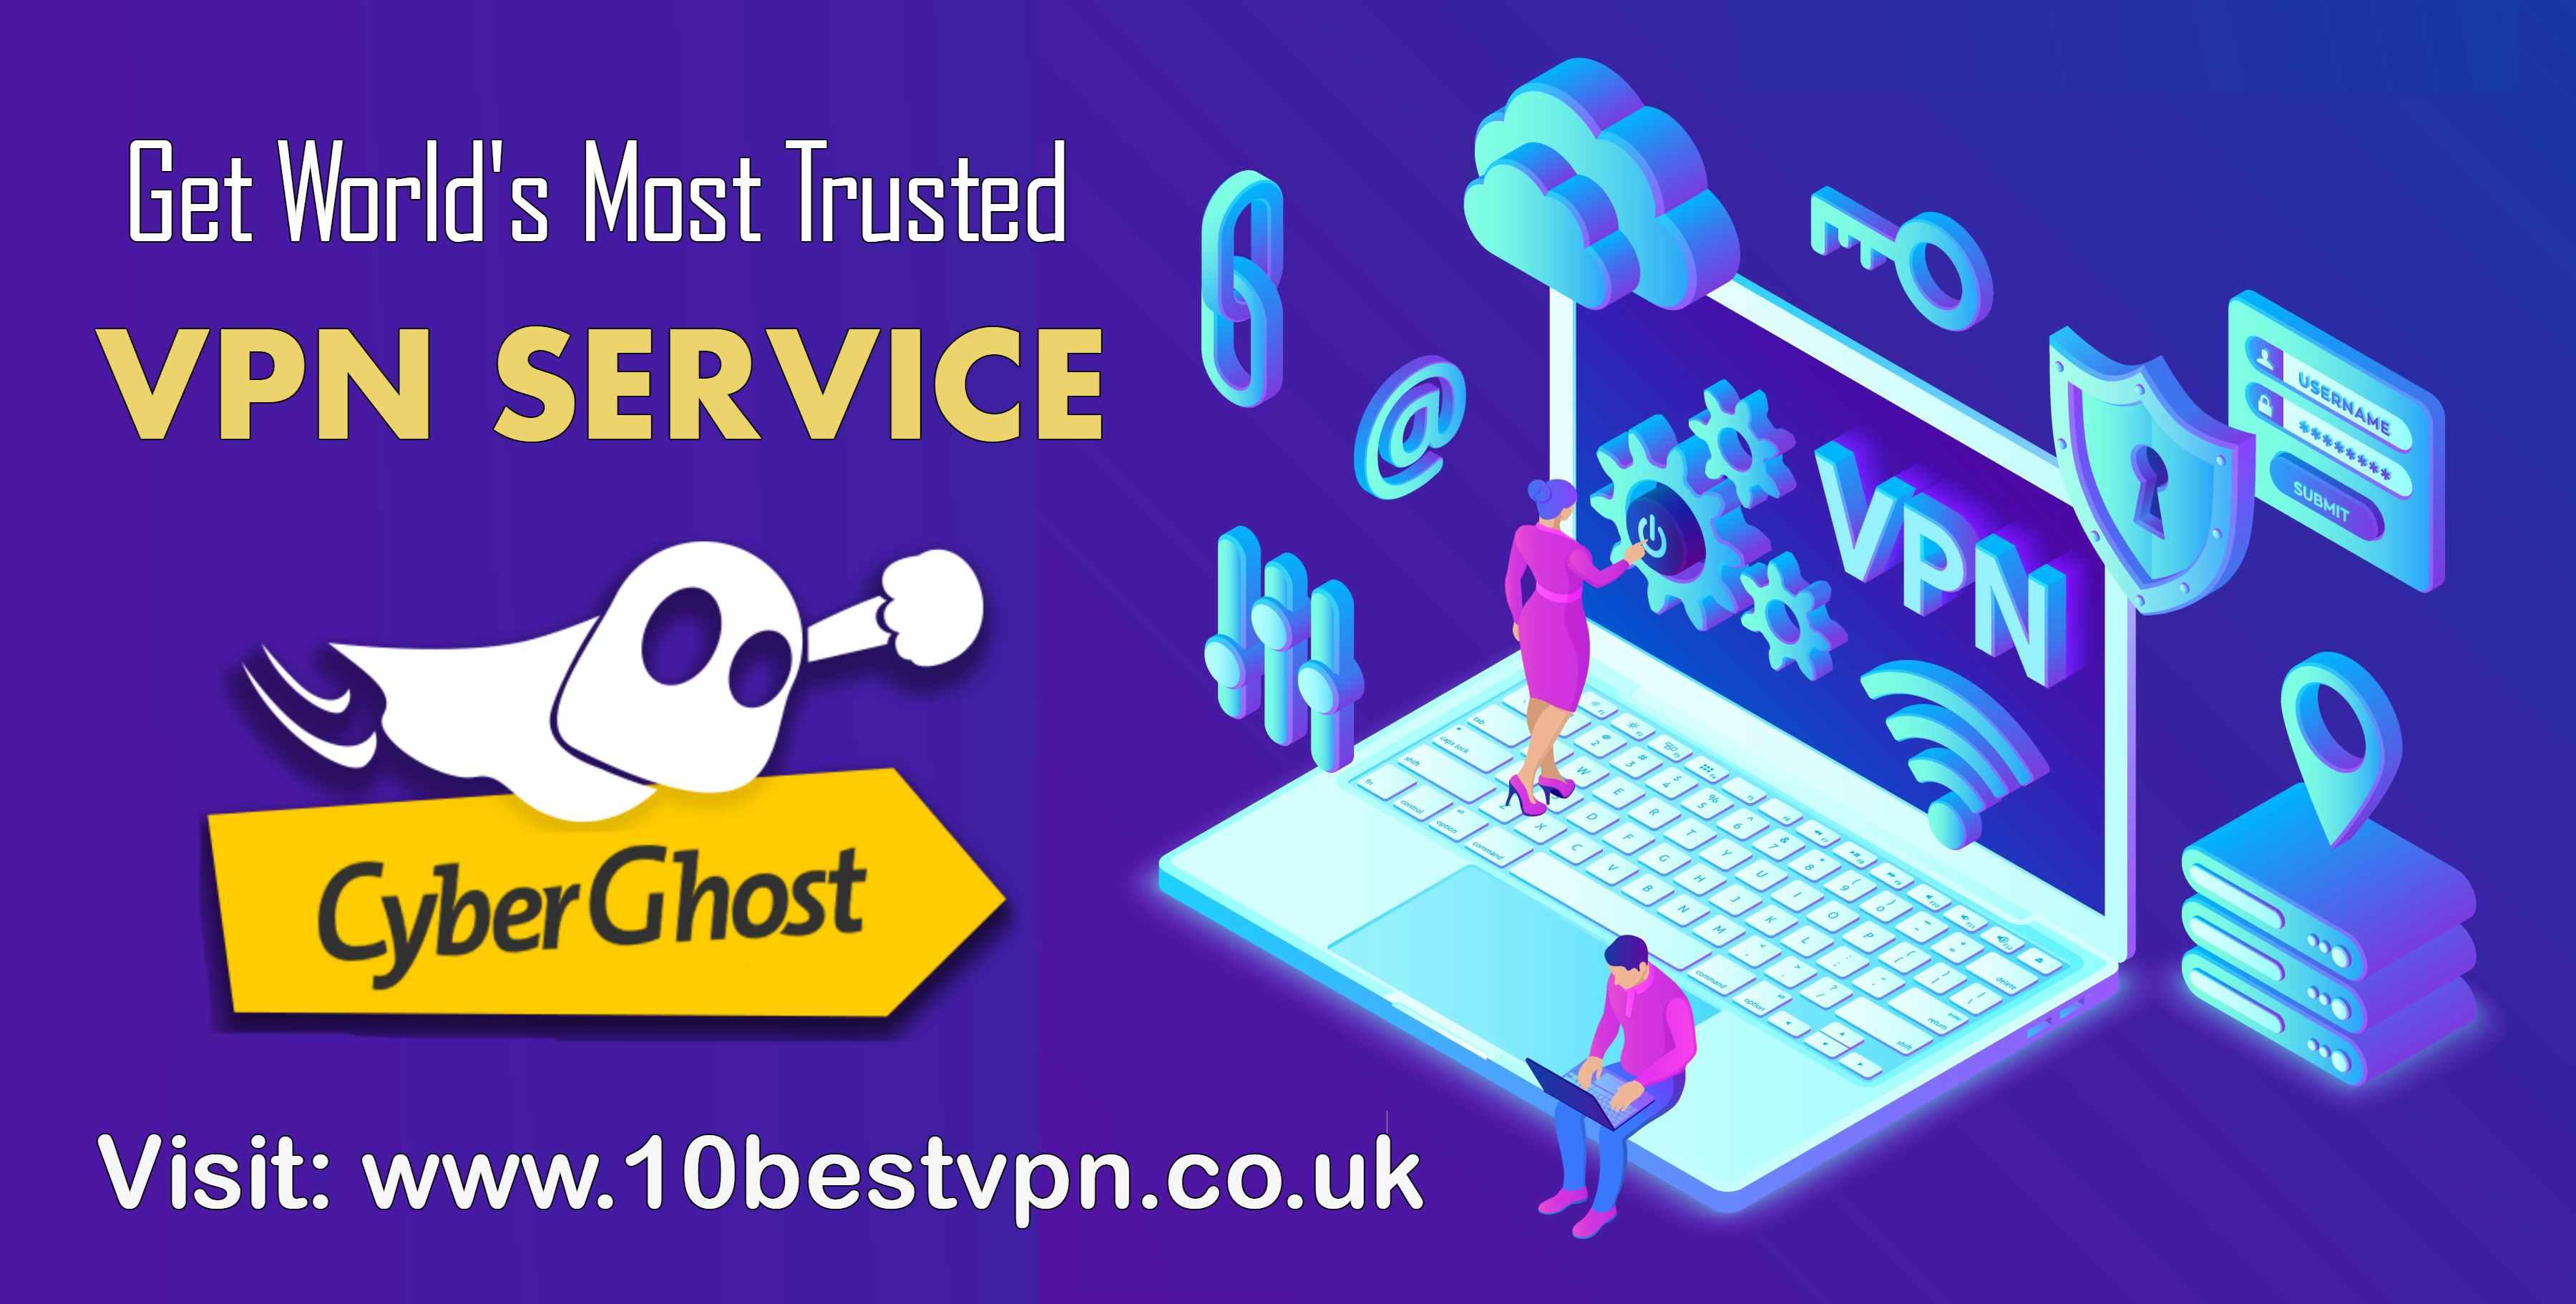 Image - #CyberghostVPN is one of the Largest #VPN providers. Its safe, reliable and fast #VPNservices make it most tr...